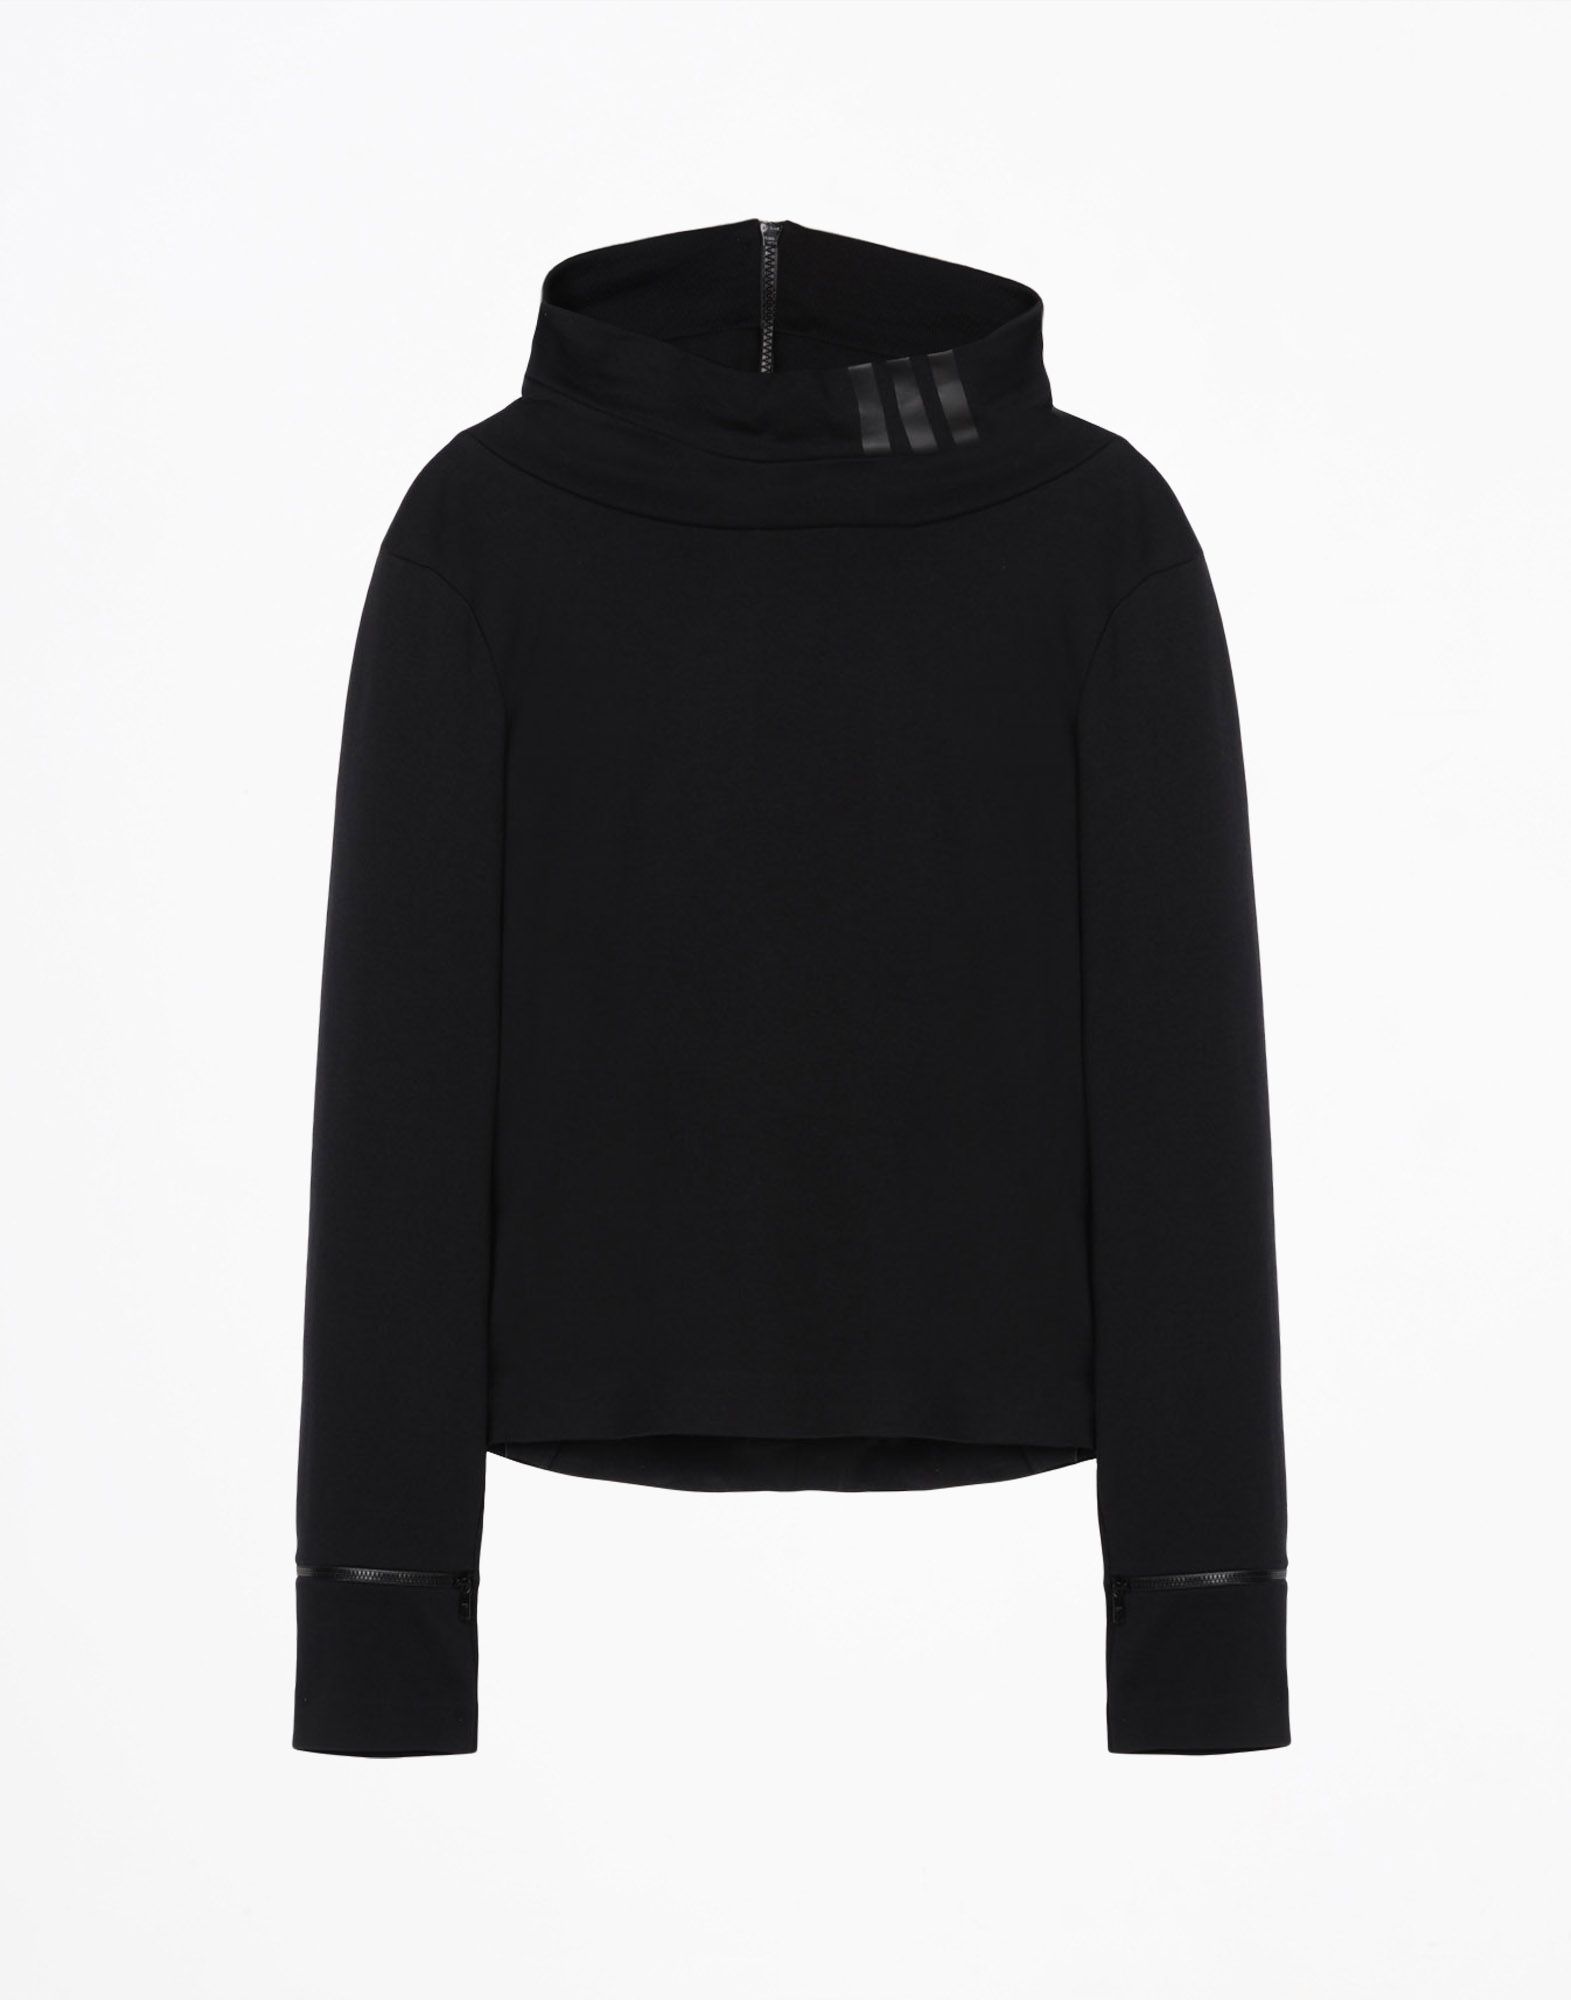 Y 3 FROST HOODIE for Women | Adidas Y-3 Official Store